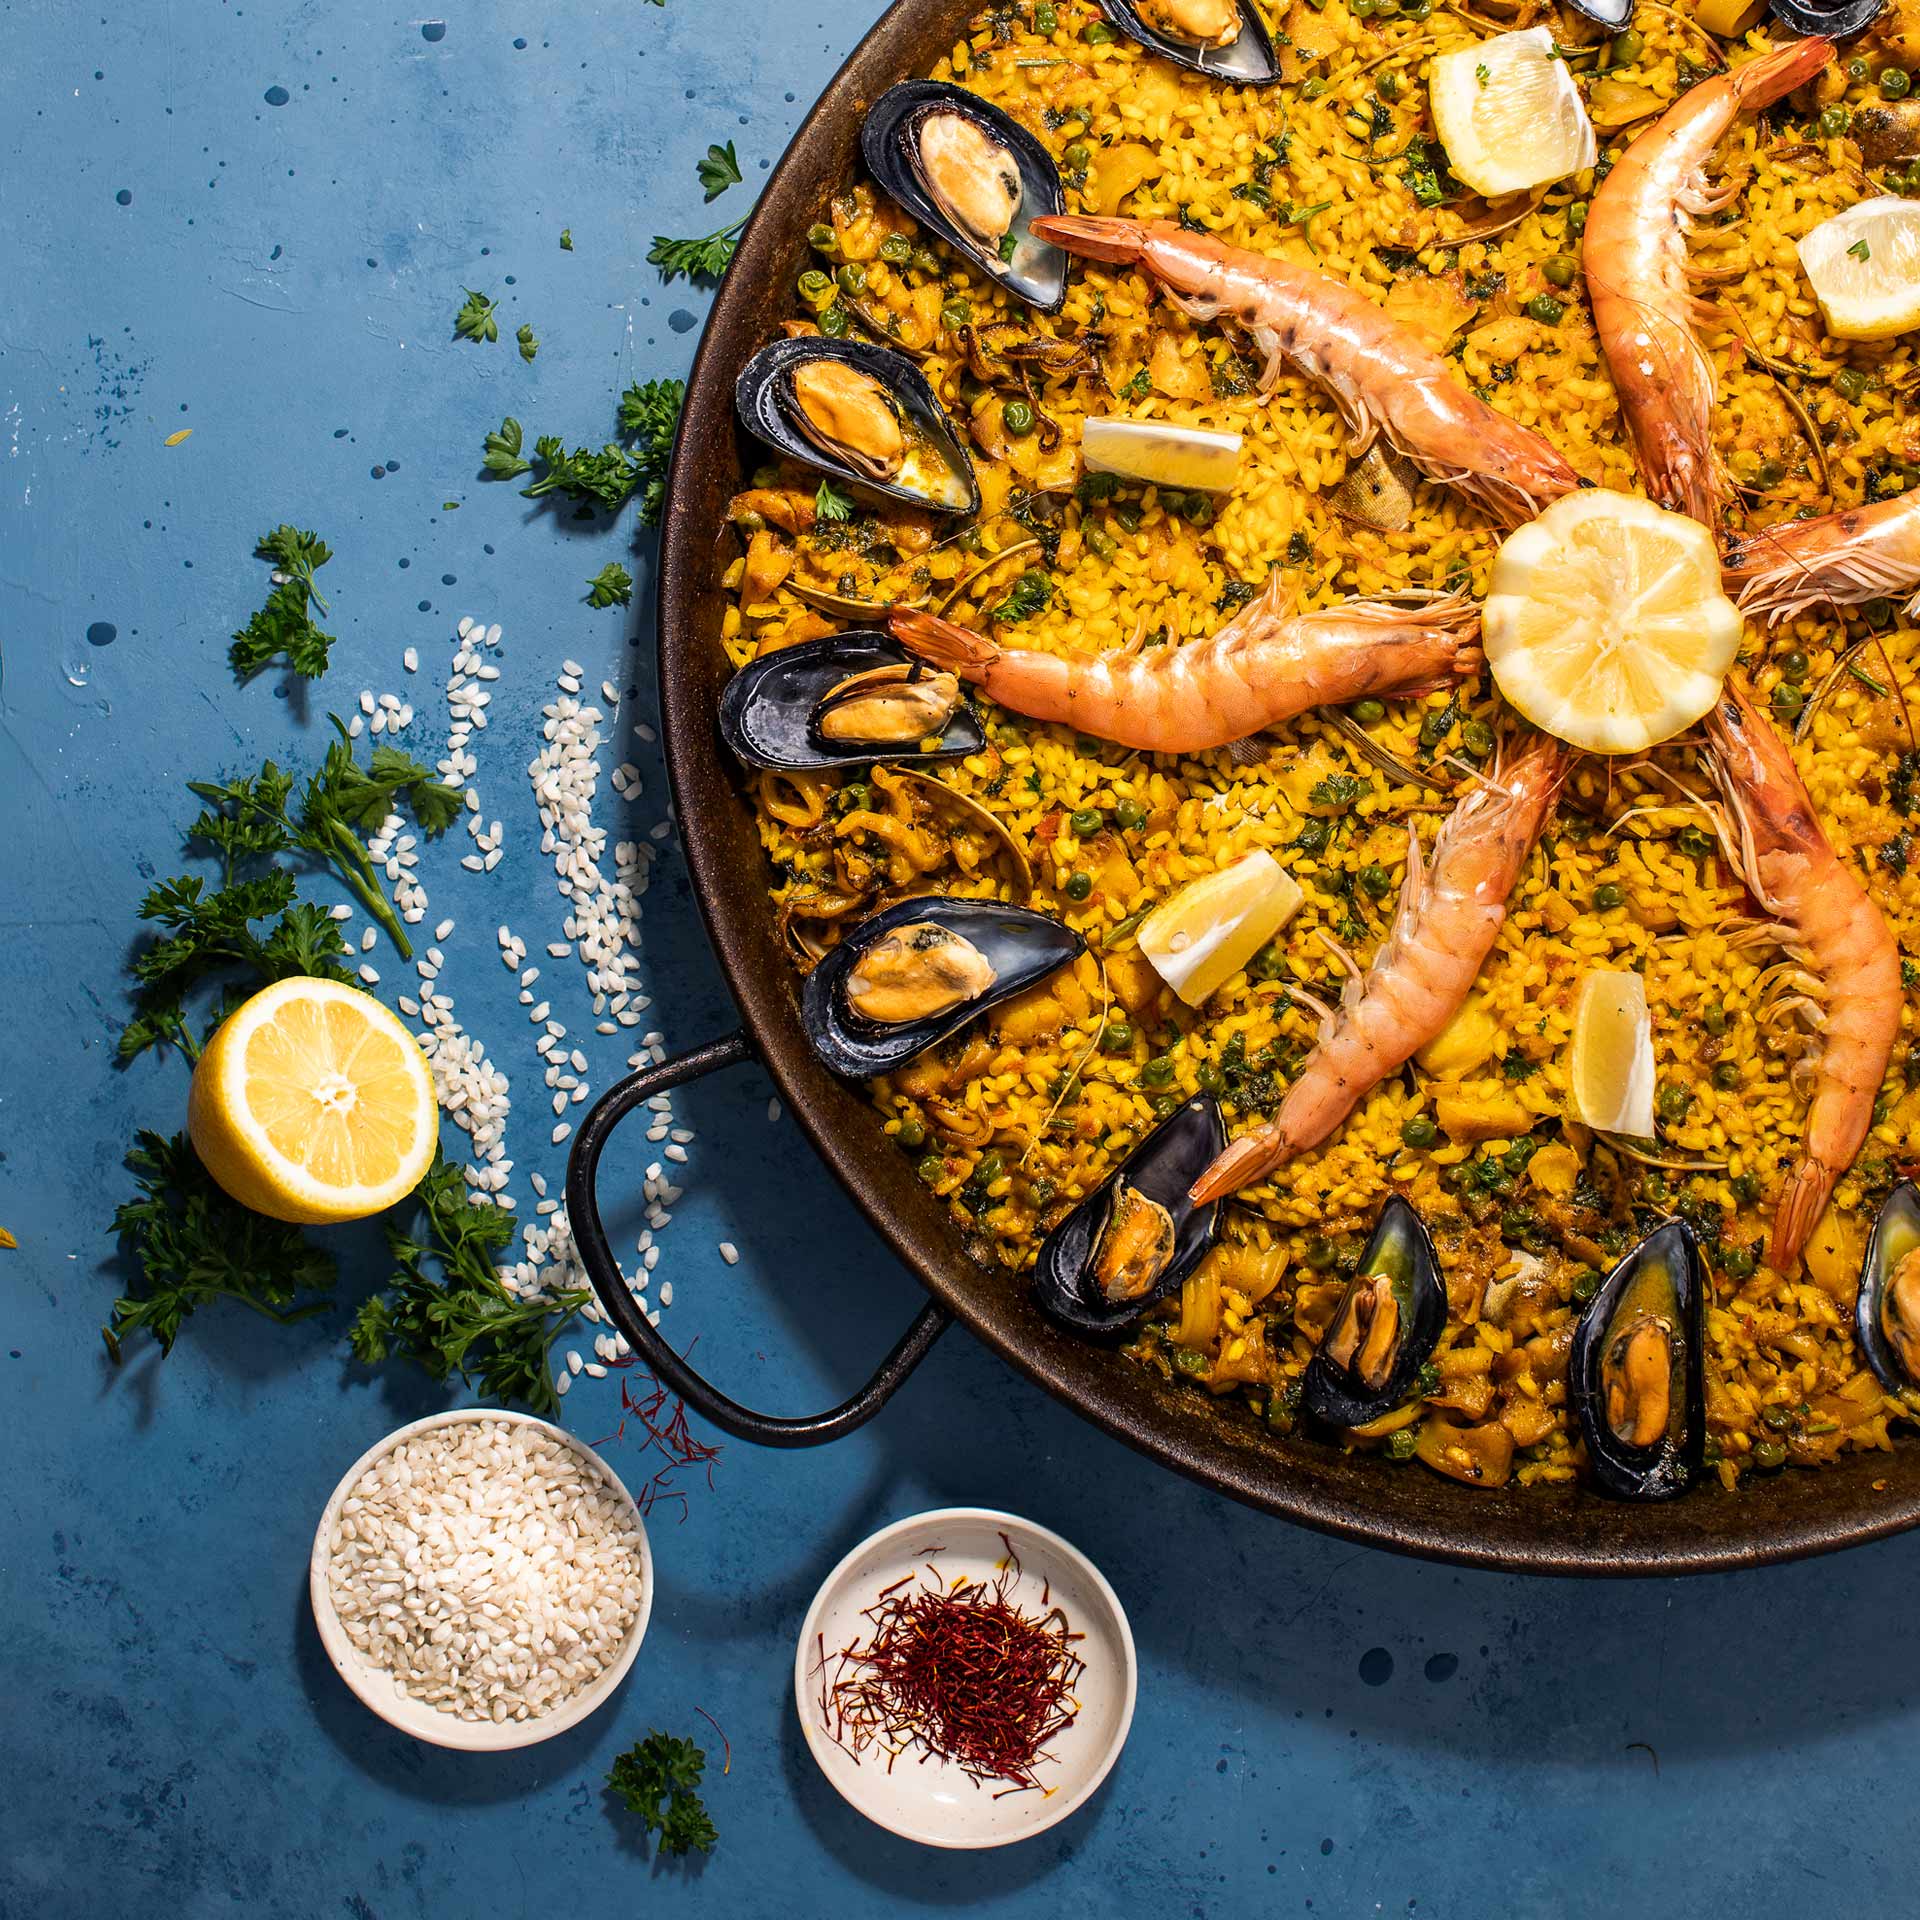 Seafood paella with ingredients on blue background